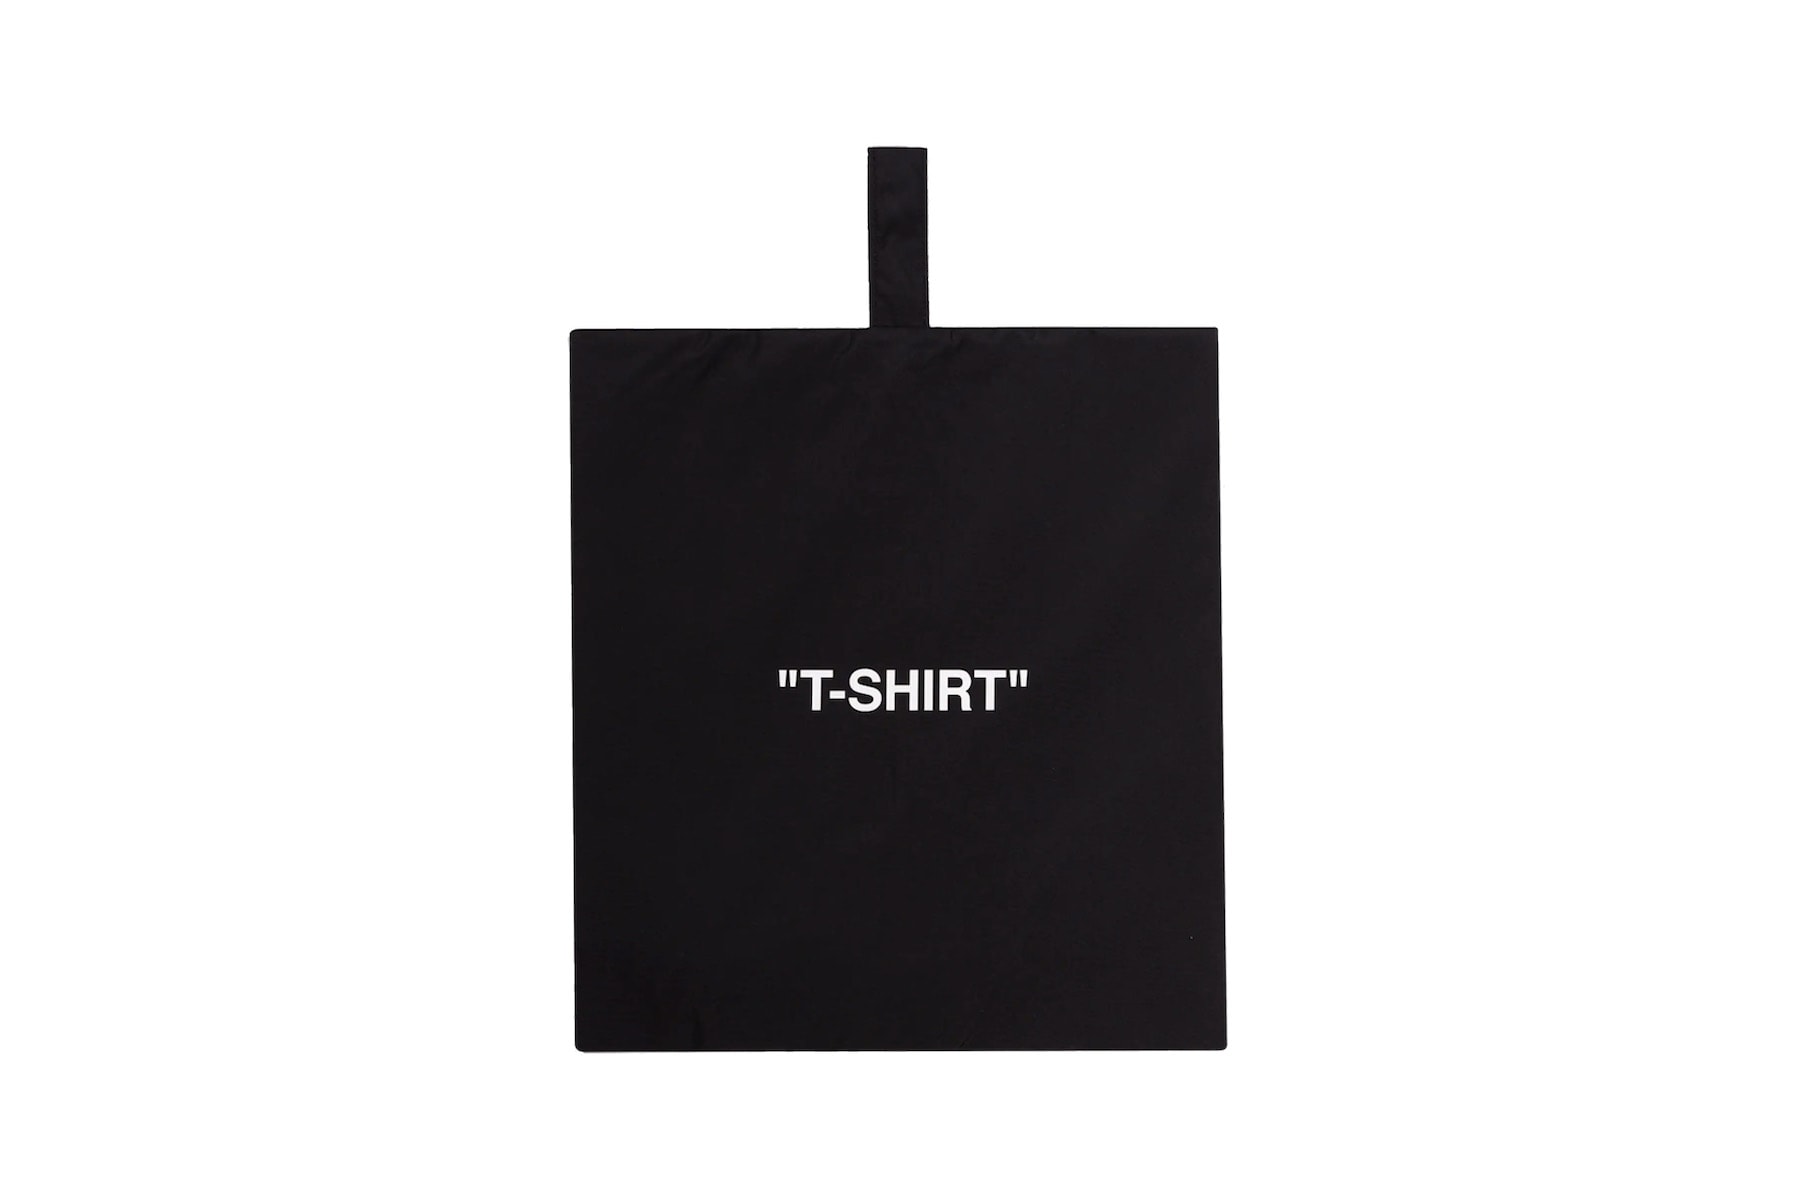 Off-White™ Logo Travel Packing Pouches Laundry Shoes Underwear T-Shirt Bag Black Storage